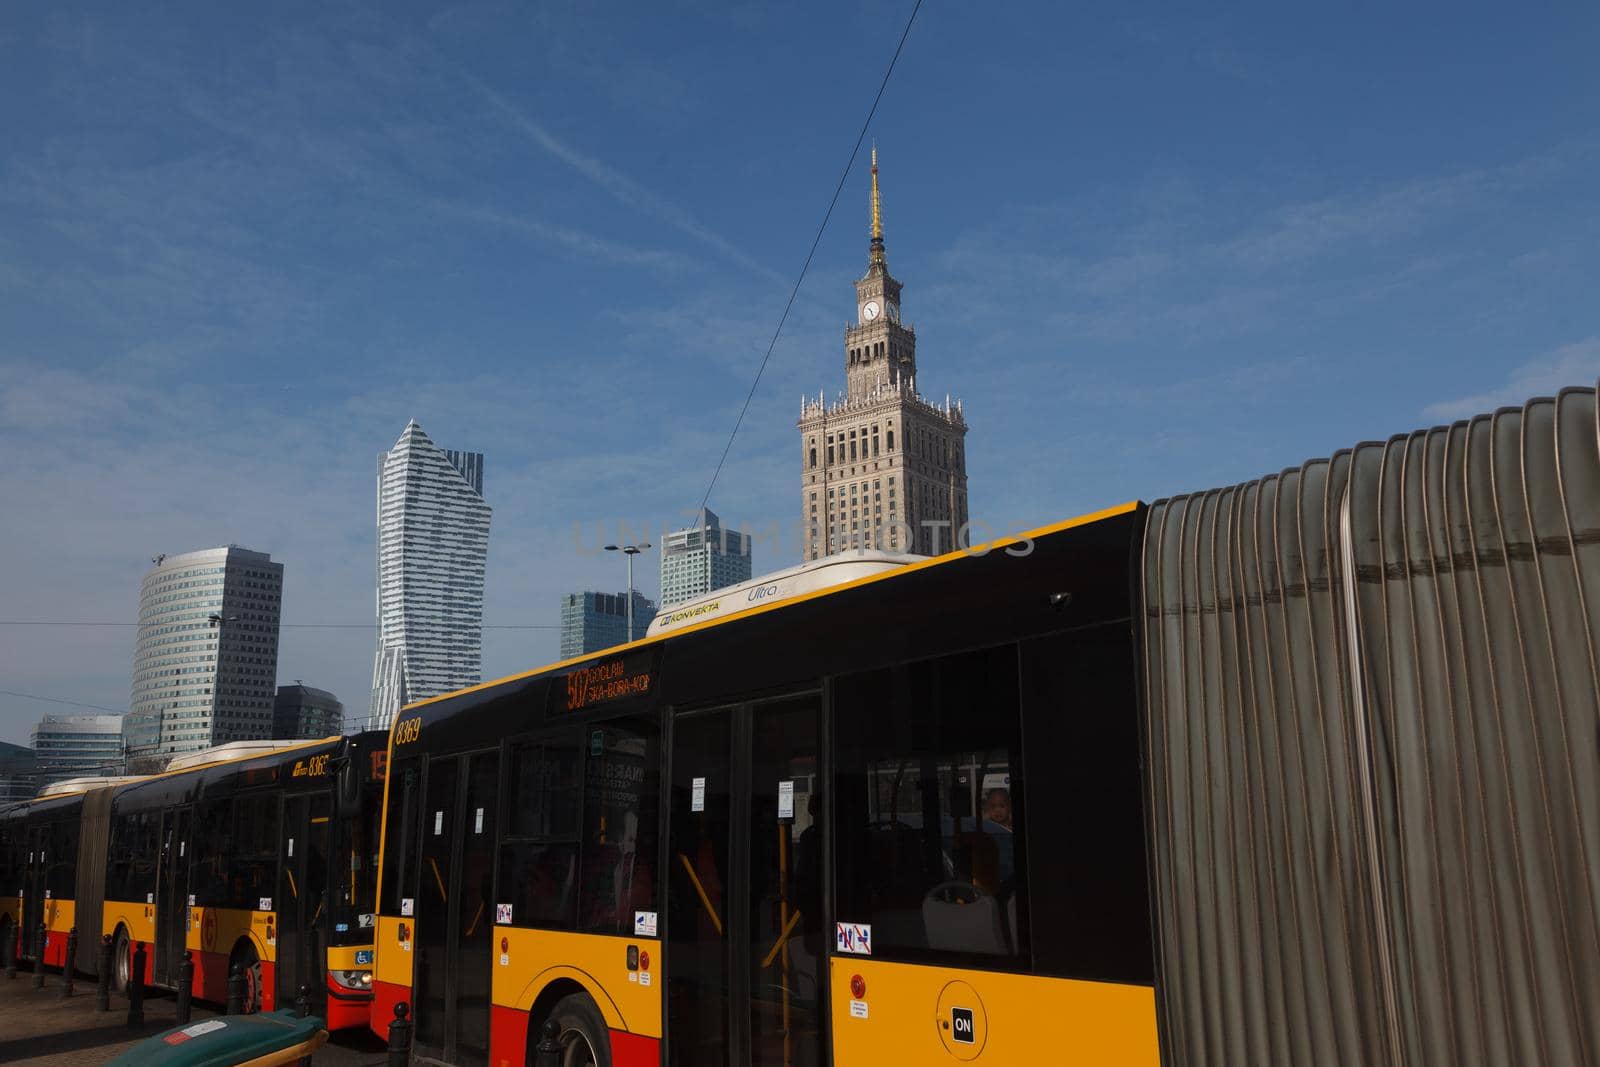 WARSAW, POLAND - Mar, 2018 Palace of Culture and Science and bus on the foreground - public transportation.